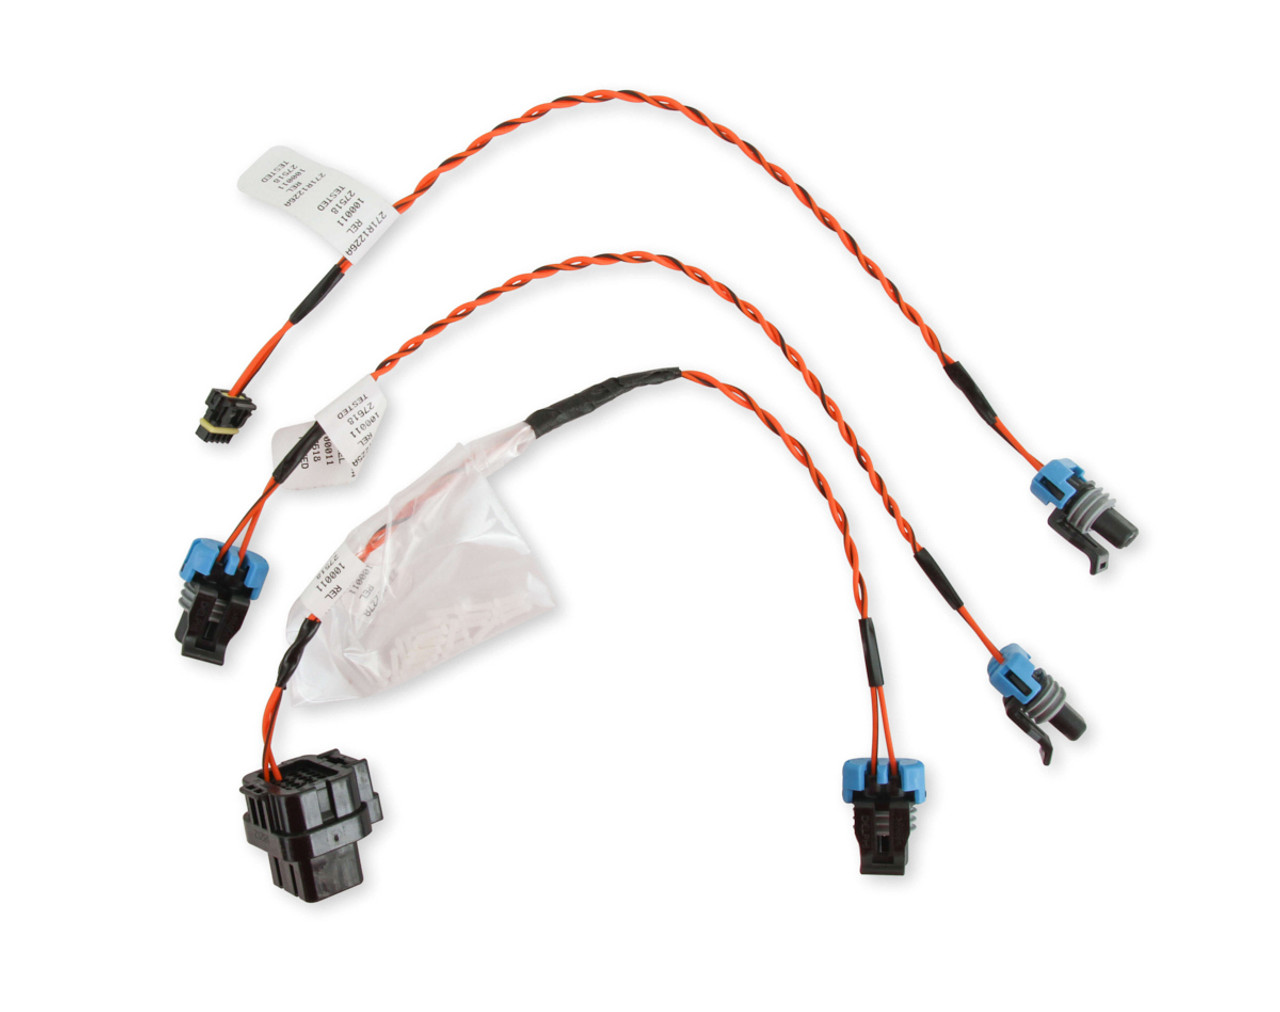 Holley EFI to RacePak Can Cables Adapter Kit